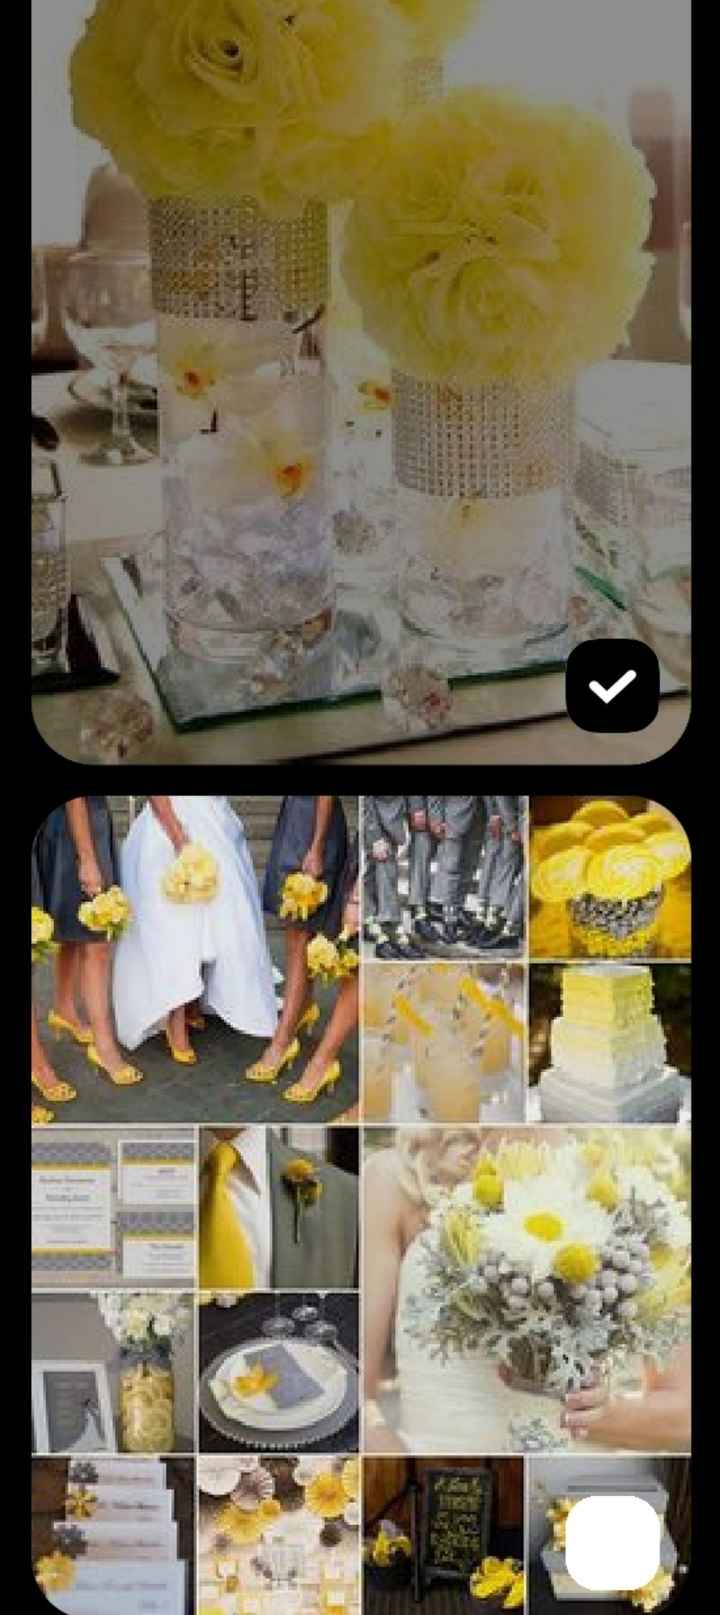 What colors did you choose for your wedding? - 1